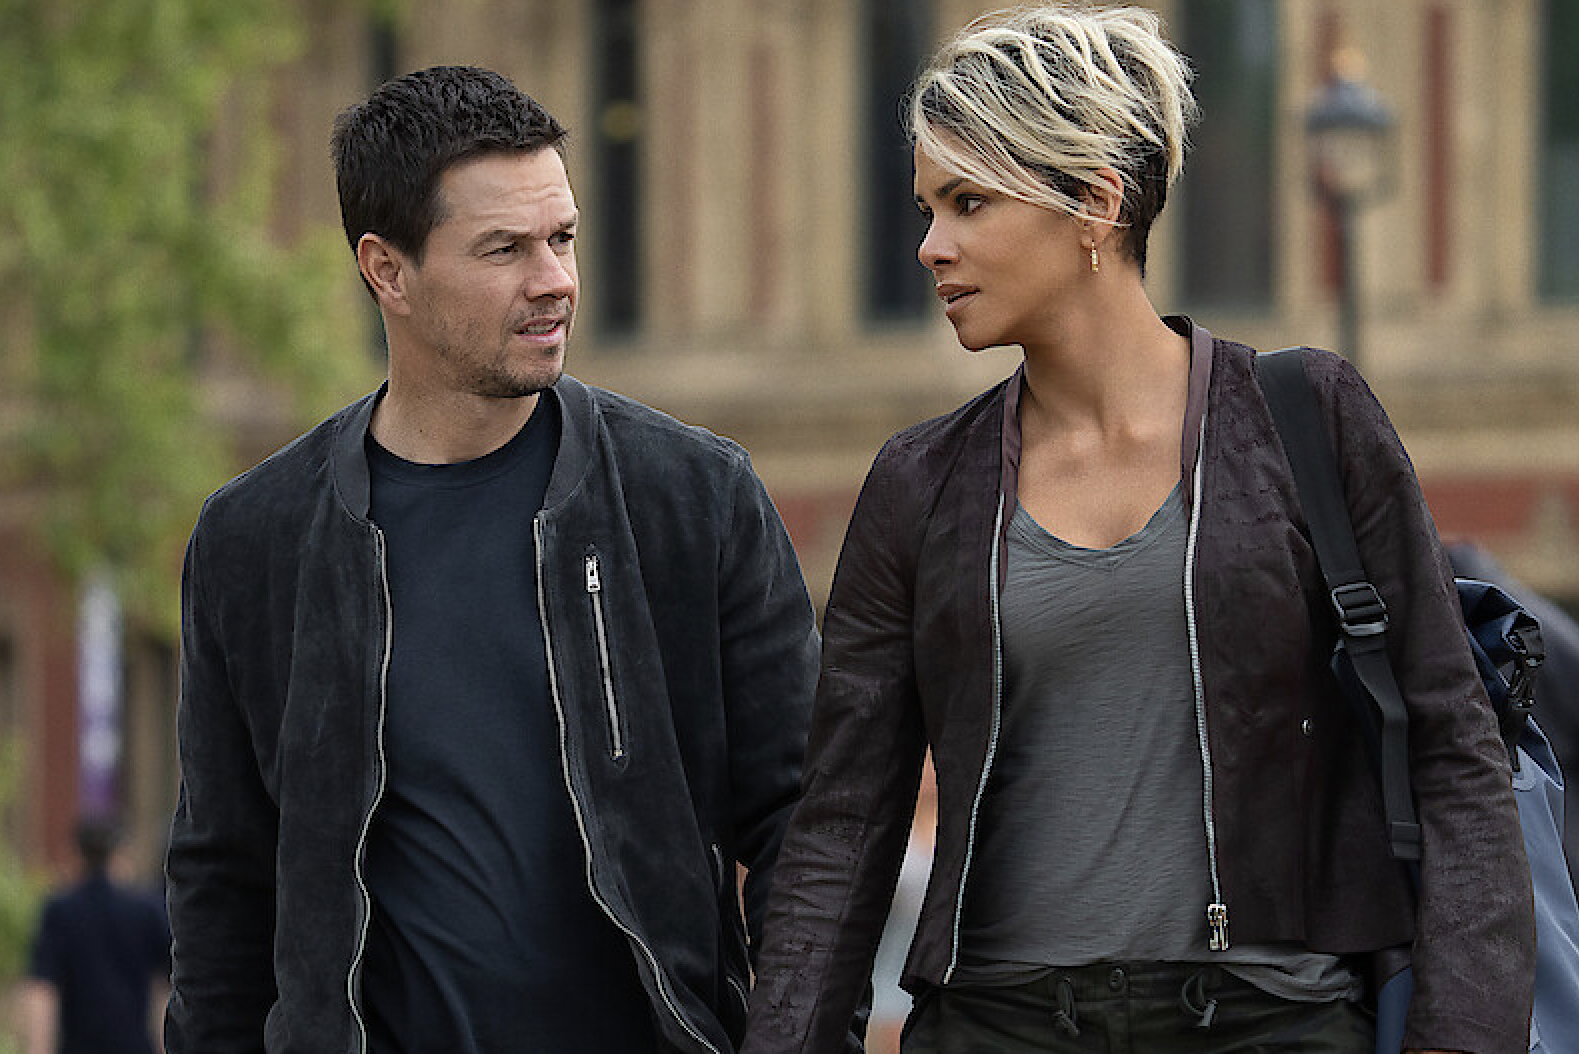 ‘The Union’ Trailer: Halle Berry Recruits Ex-Boyfriend Mark Wahlberg on Spy Mission in Netflix Action Comedy